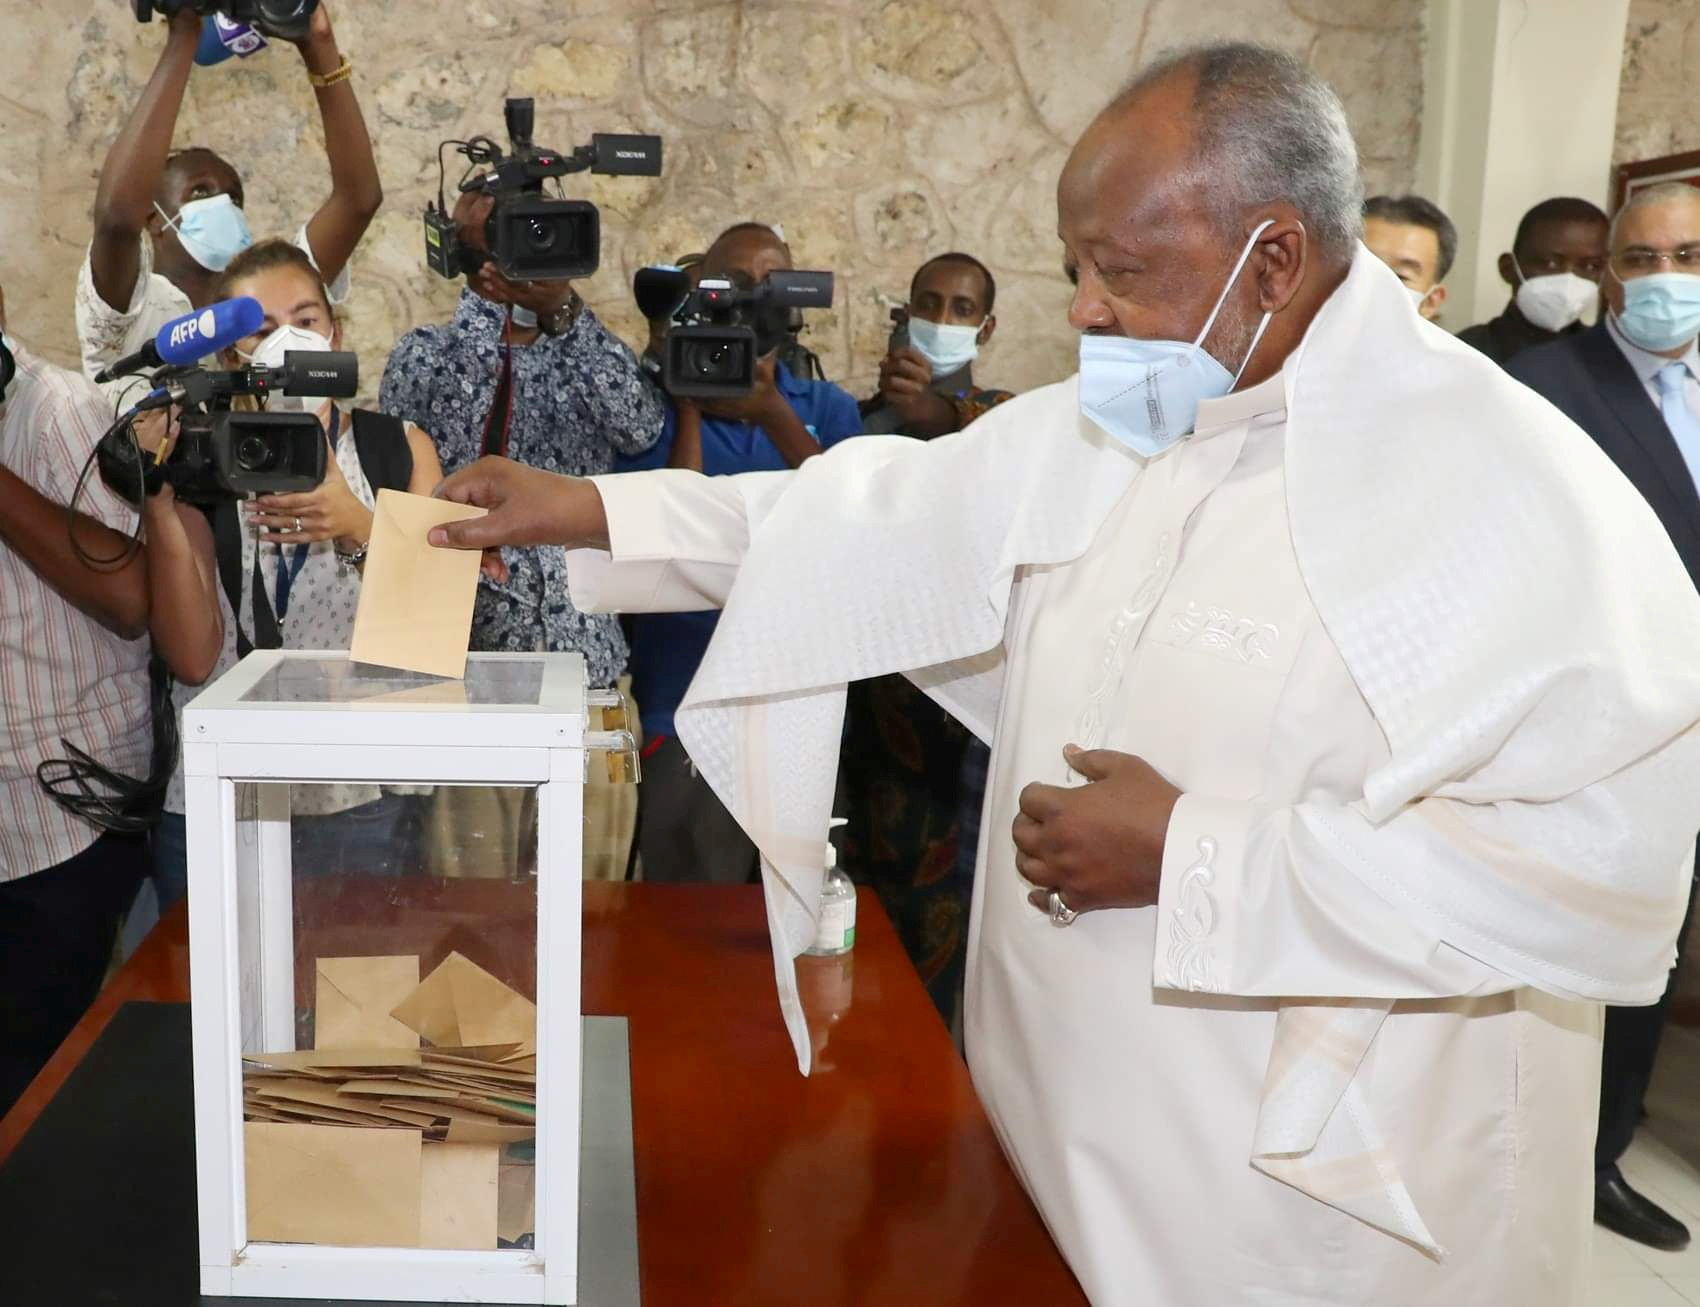 Djibouti's President Ismael Omar Guelleh casts his ballot during the presidential elections at the Ras-Dika district polling centre in Djibouti